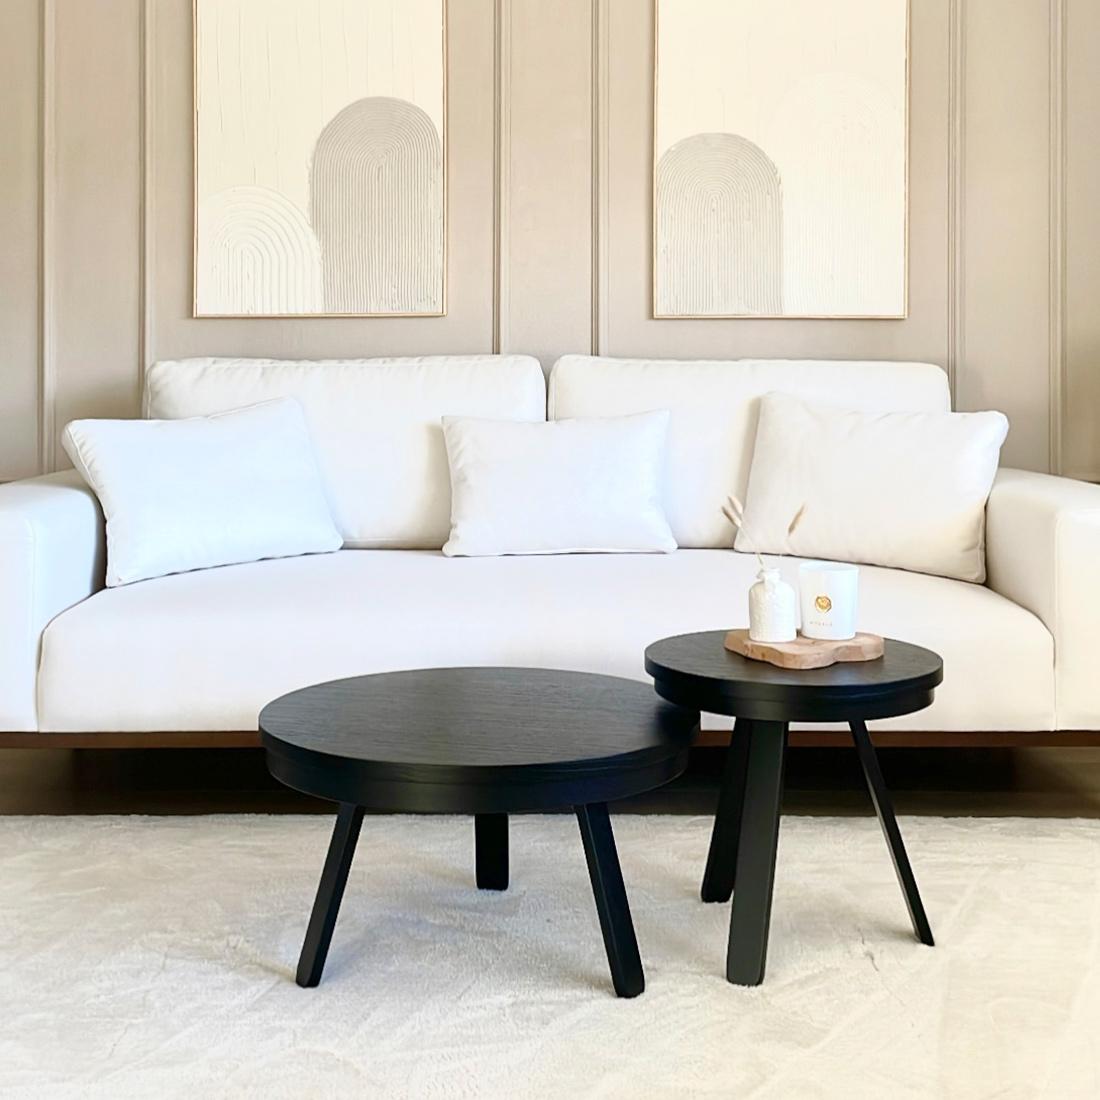 A round coffee table that combines tradition and modernity, adapting to the dynamics of each home space.

The medium-sized member of the Batea family is not just a wood side table, it has extra functionality, a small storage space where you can